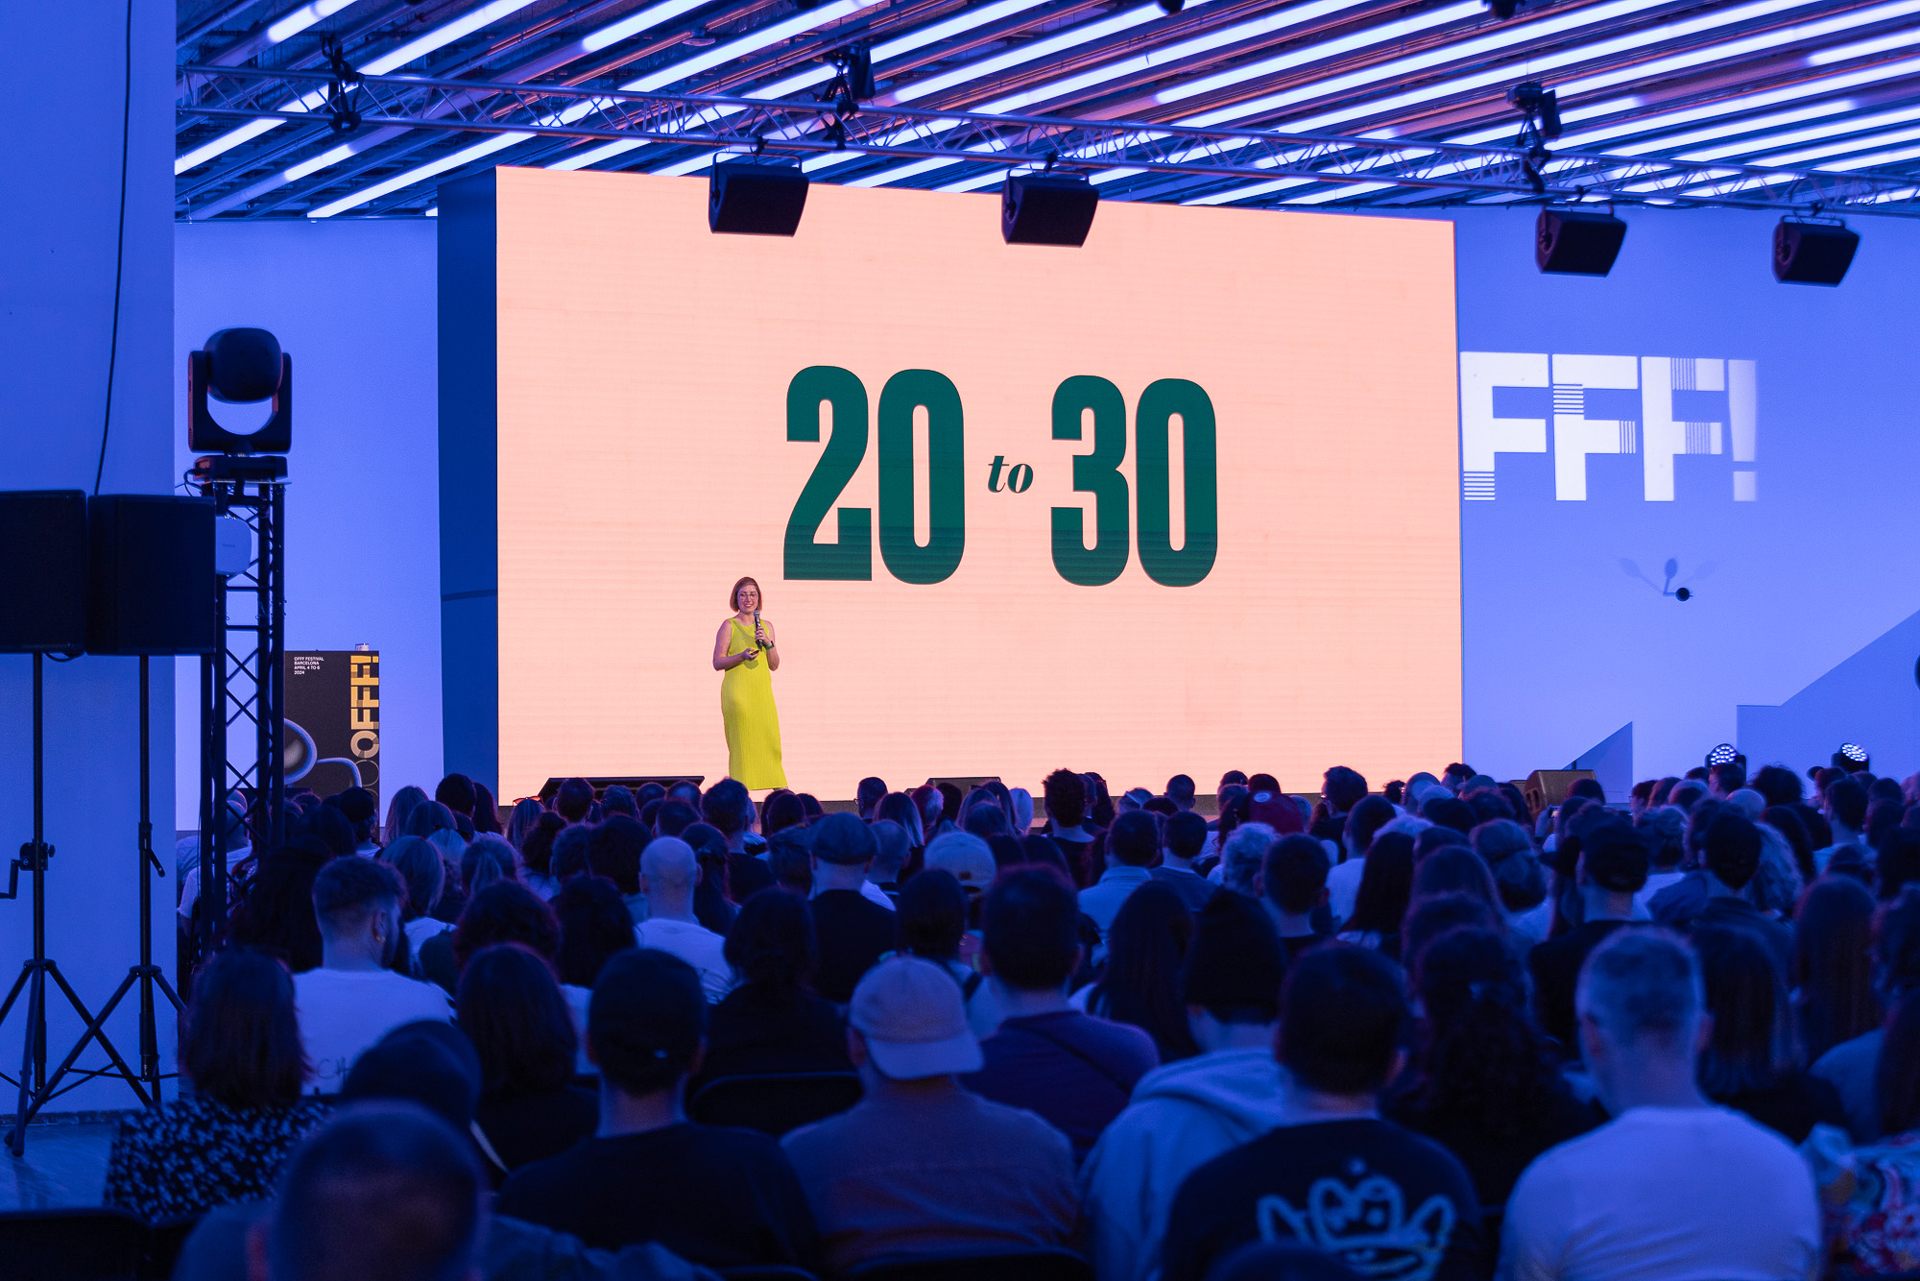 Jessica Hische on stage at OFFF Barcelona in front of a stage that says '20 to 30'